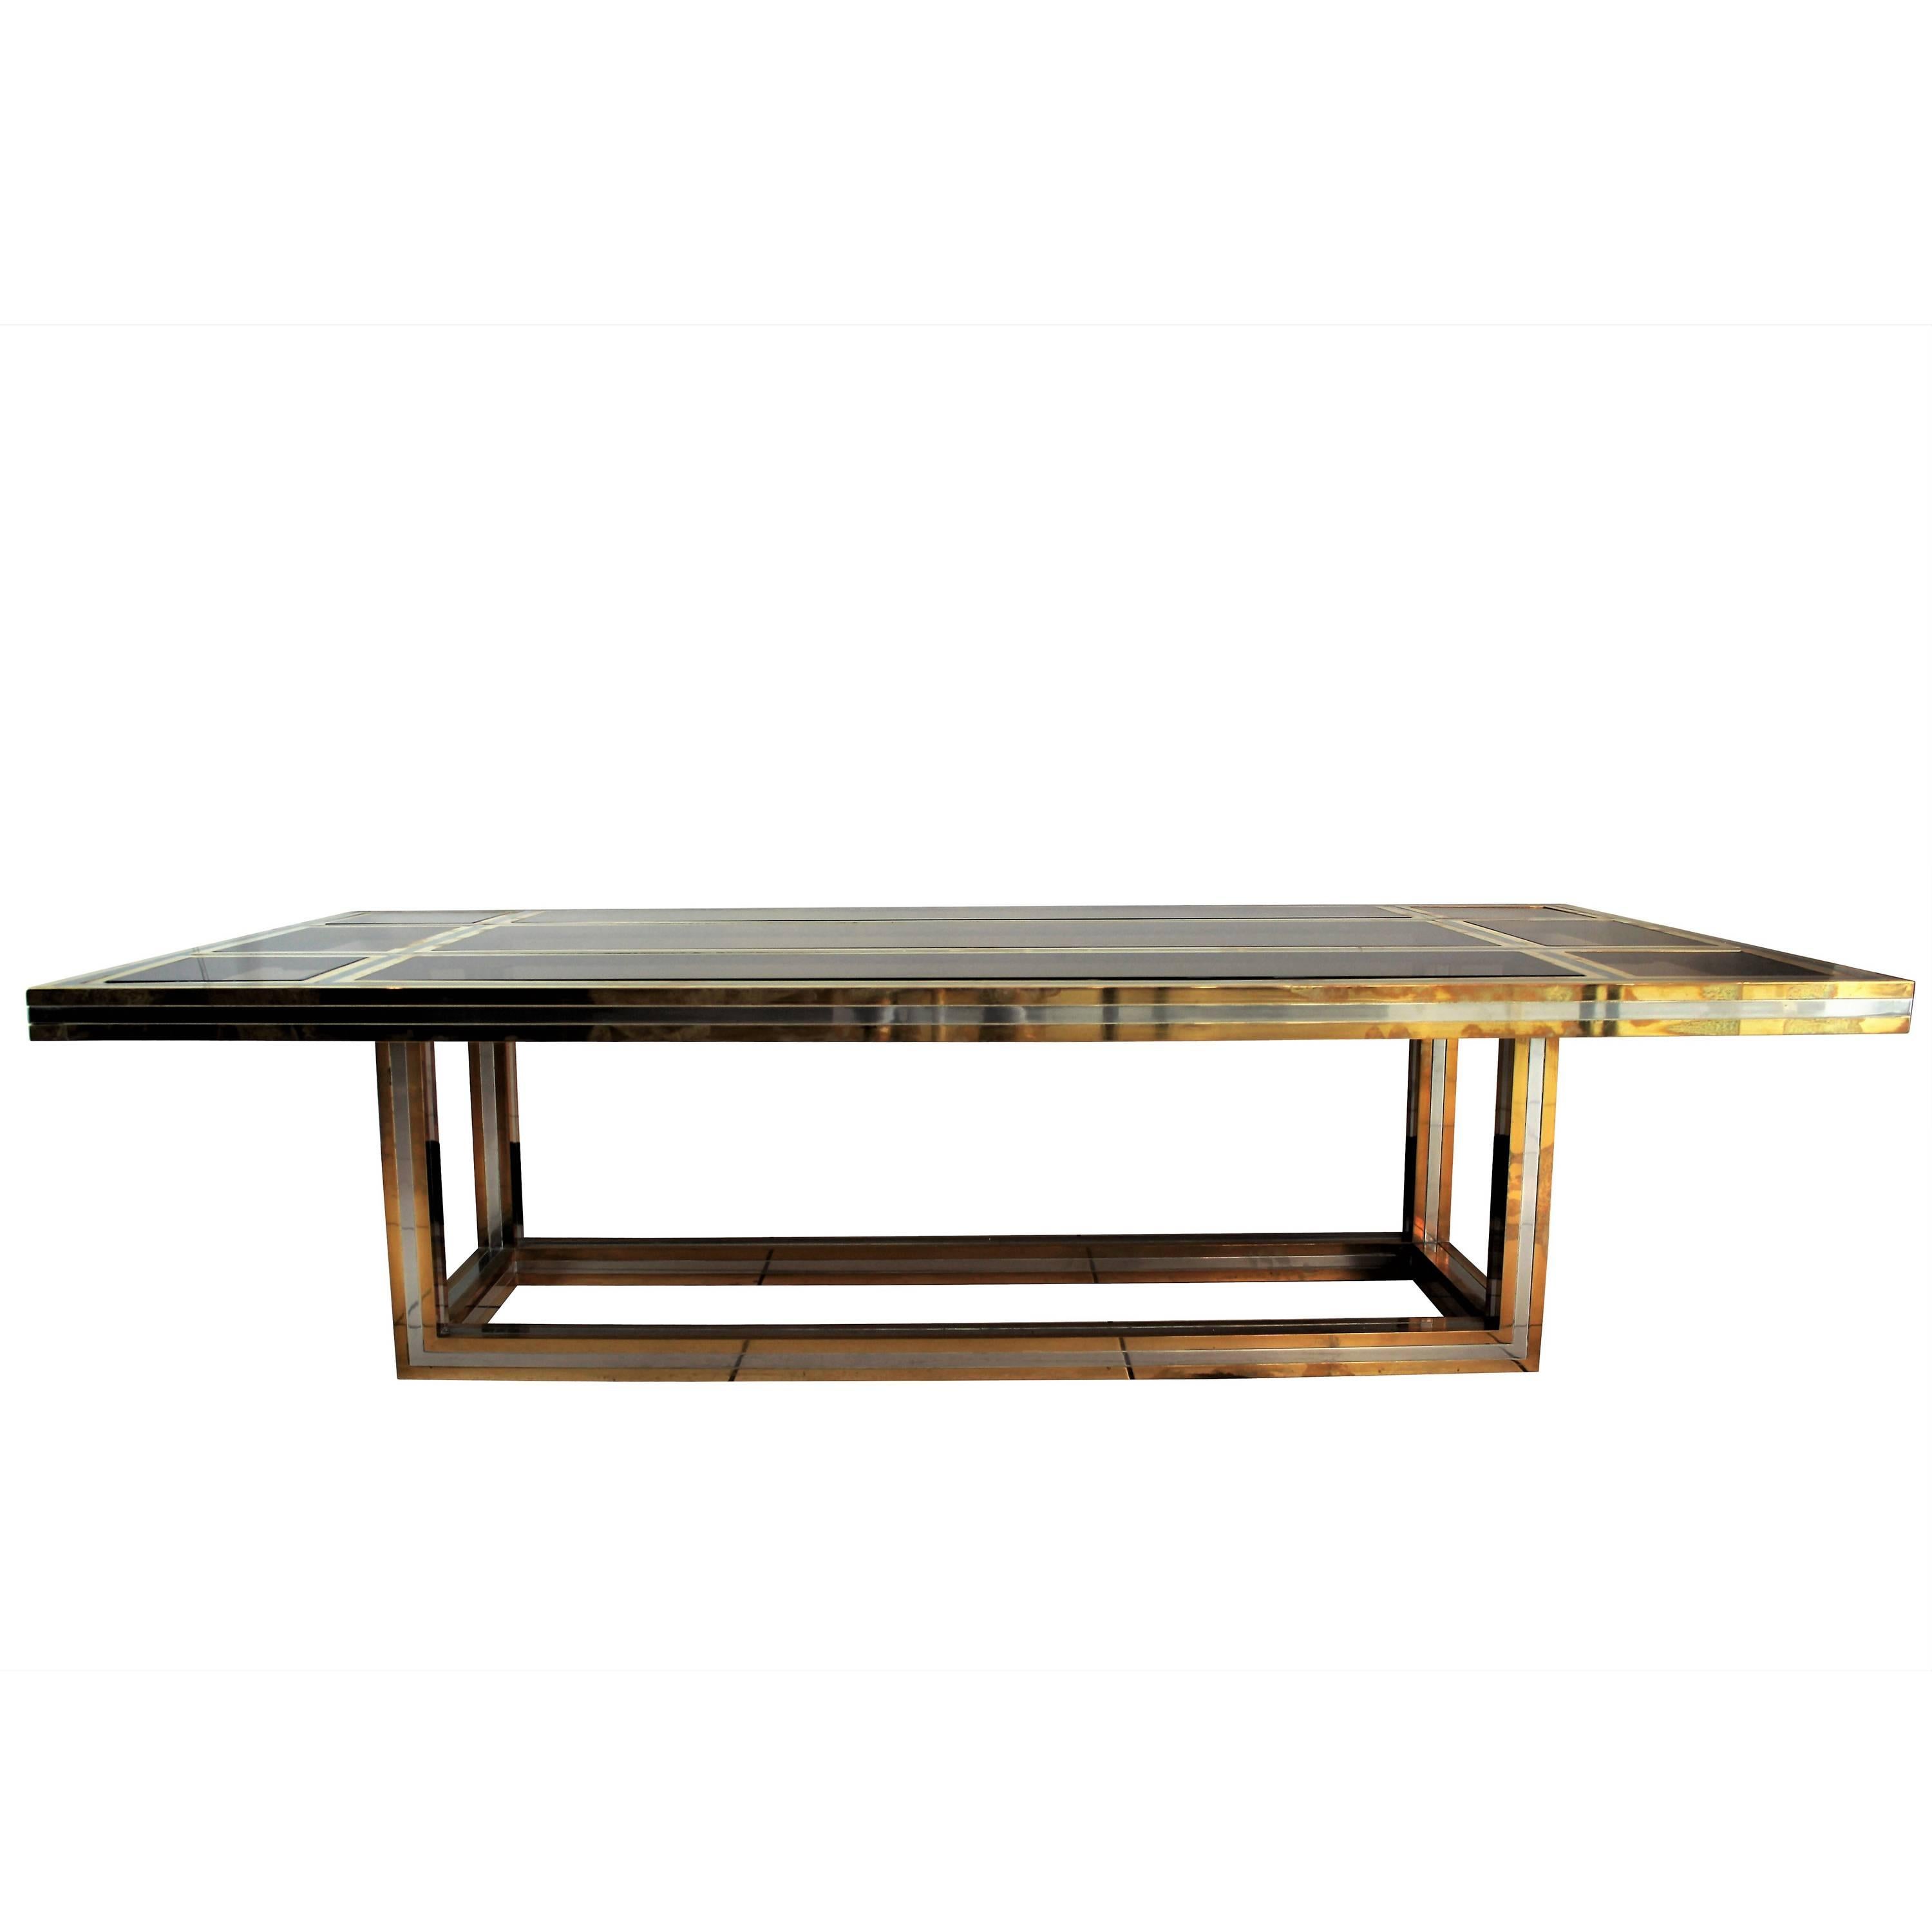 Large coffee table by Romeo Rega in chrome and brass. Spacers in glass smoked.
Original condition.
circa 1970.
More images available upon request.